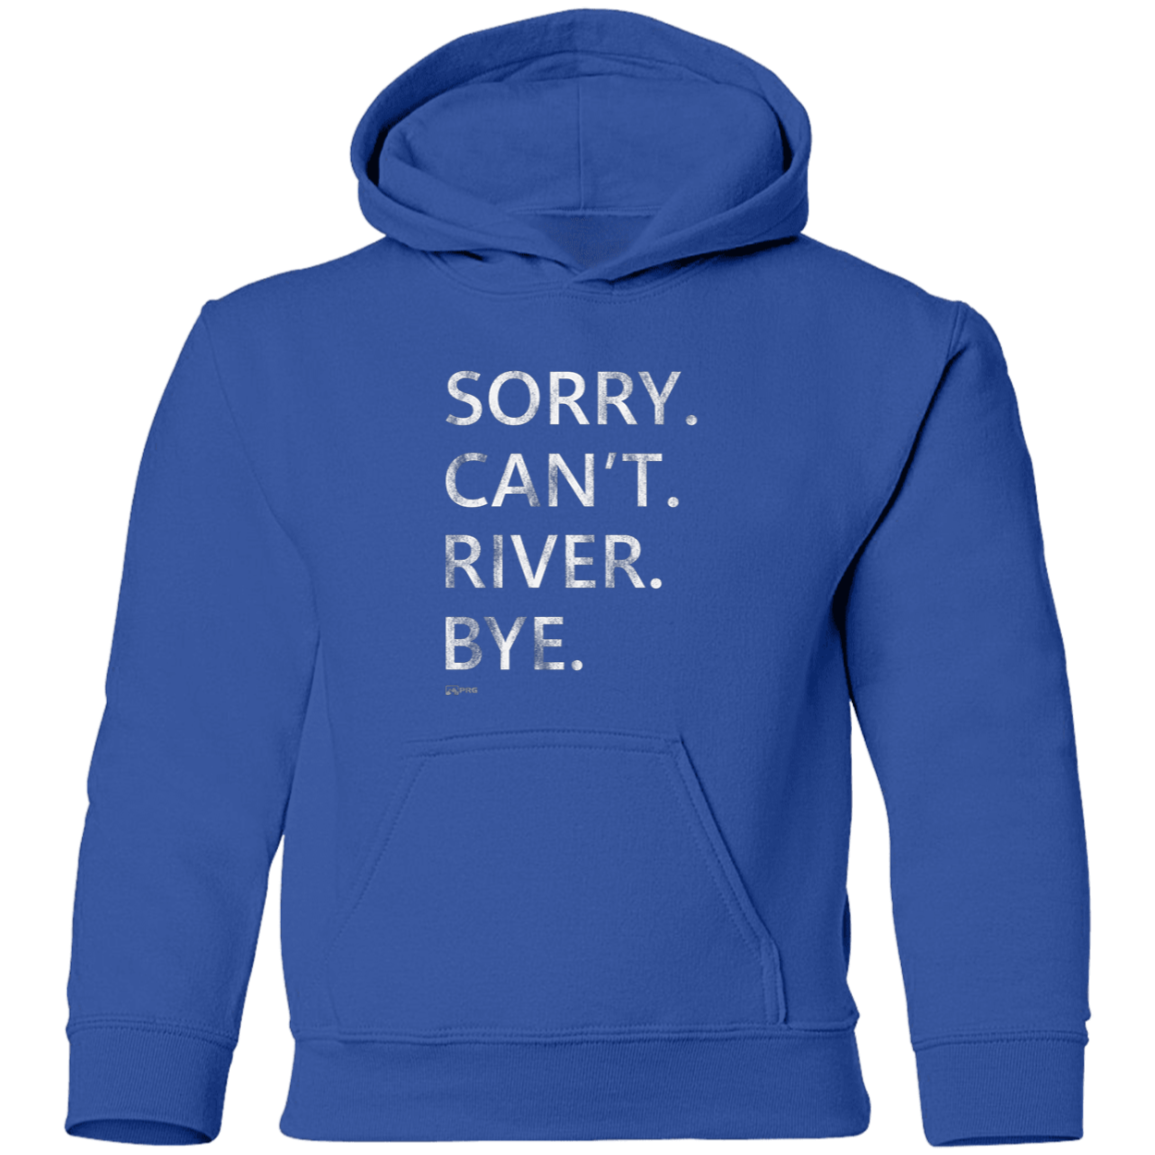 Sorry. Can't. River. Bye. - Youth Hoodie